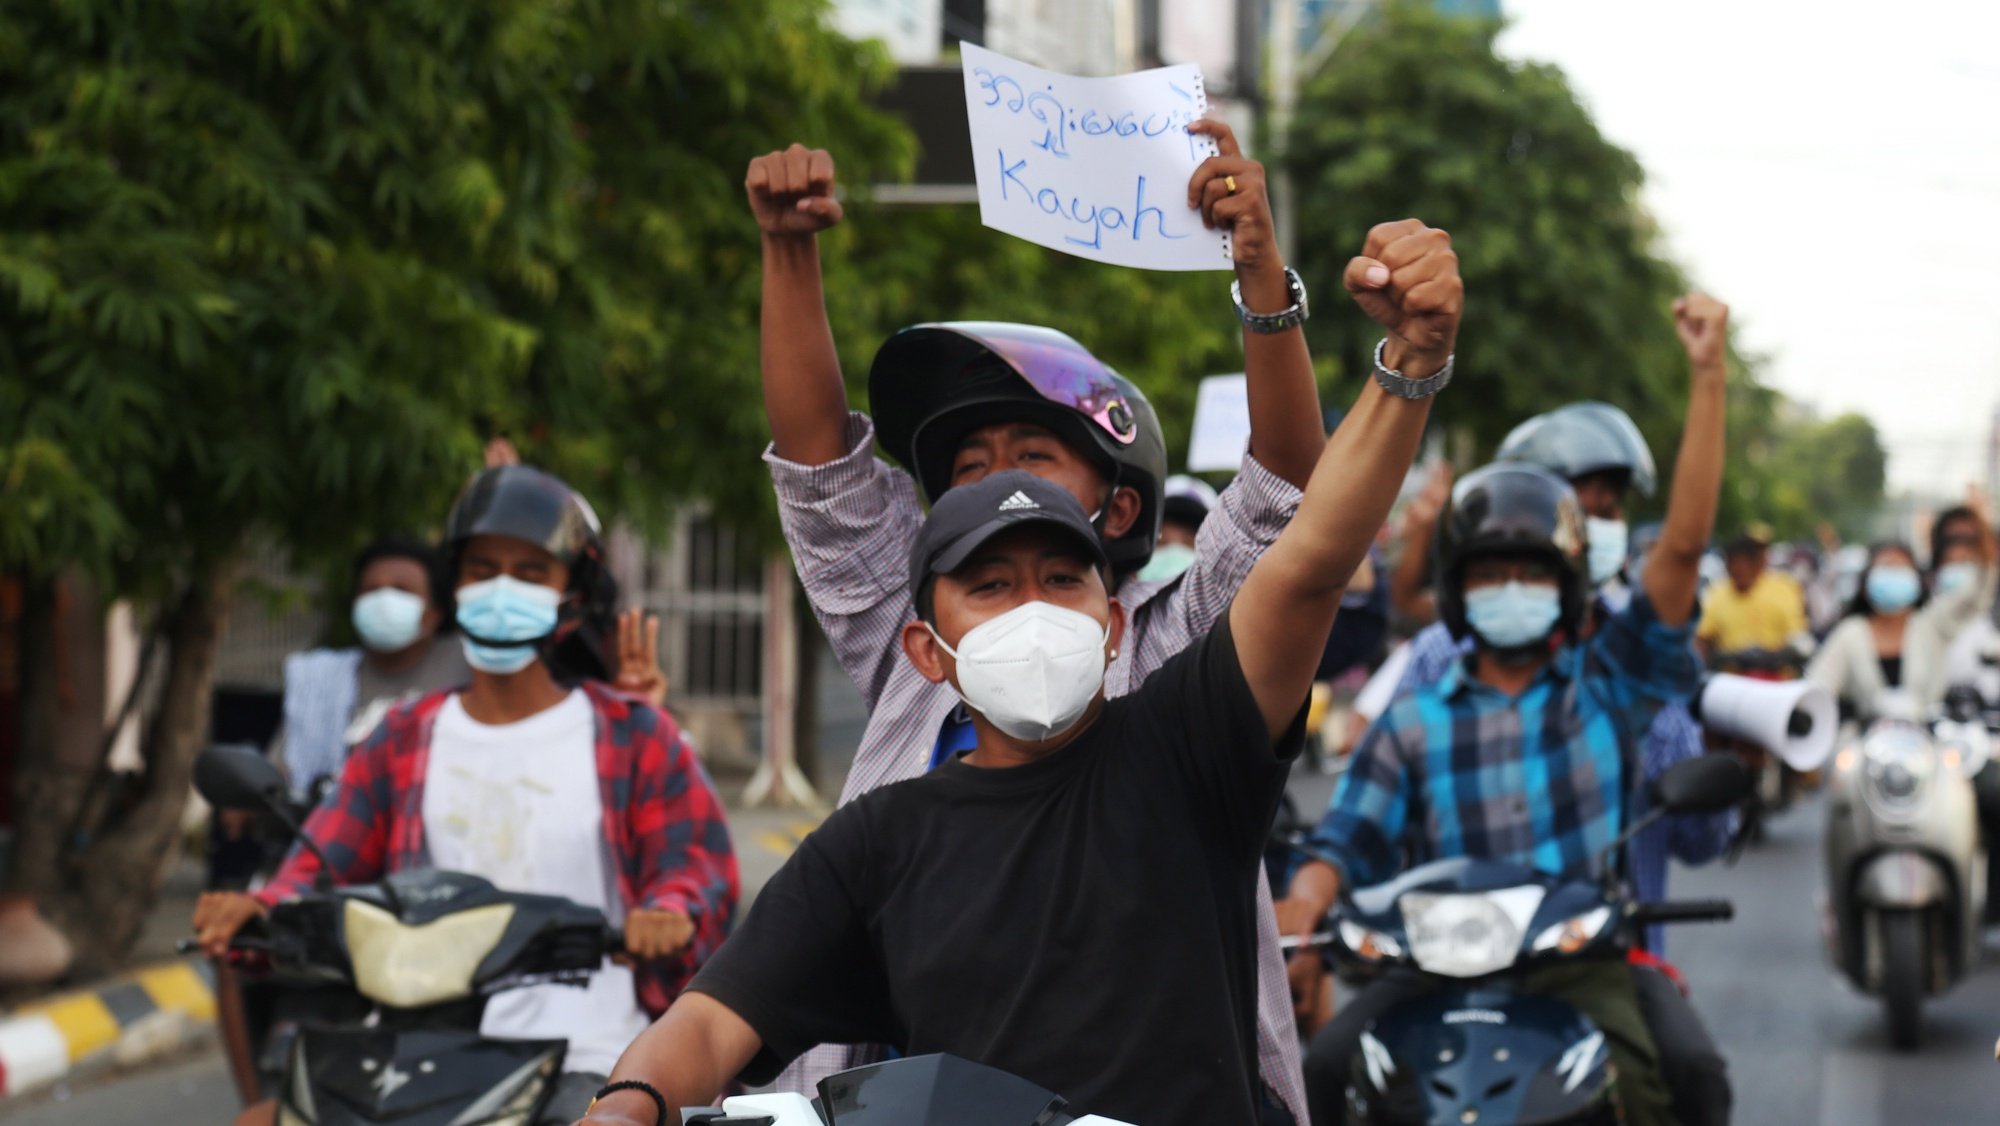 epa09217702 Demonstrators gesture and hold a placard reading &#039;Don&#039;t surrender, Kayah&#039; while riding on motorcycles during a protest against the military coup in Mandalay, Myanmar, 21 May 2021. At least 800 people have been killed by Myanmar armed forces and more than 4,000 detained since the military seized power on 01 February 2021, according to the Assistance Association for Political Prisoners (AAPP).  EPA/STRINGER